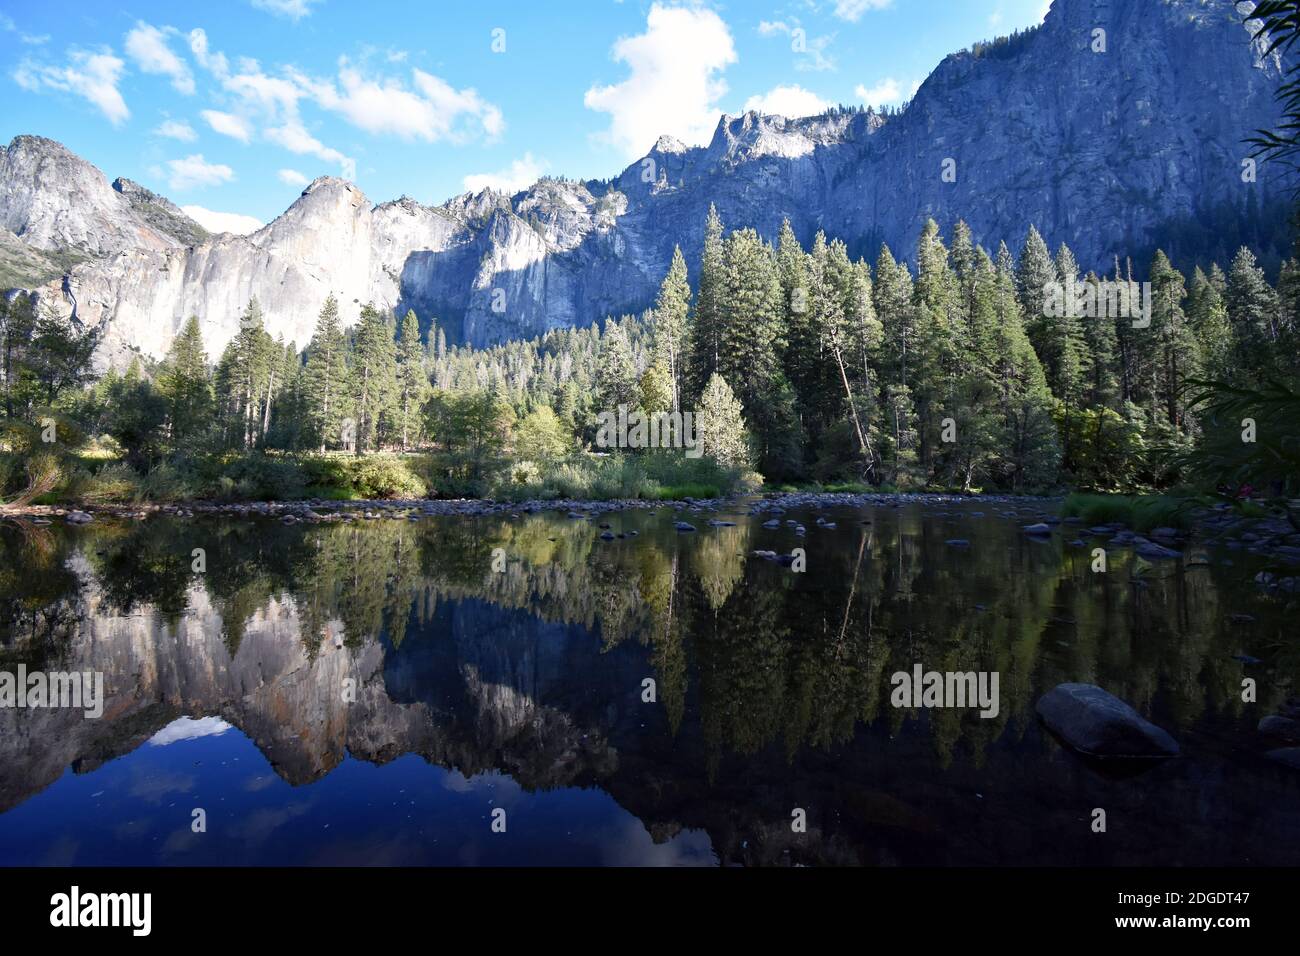 The reflection of granite cliffs and trees in the still calm waters of the Merced River from Valley View in Yosemite National Park, California, USA Stock Photo